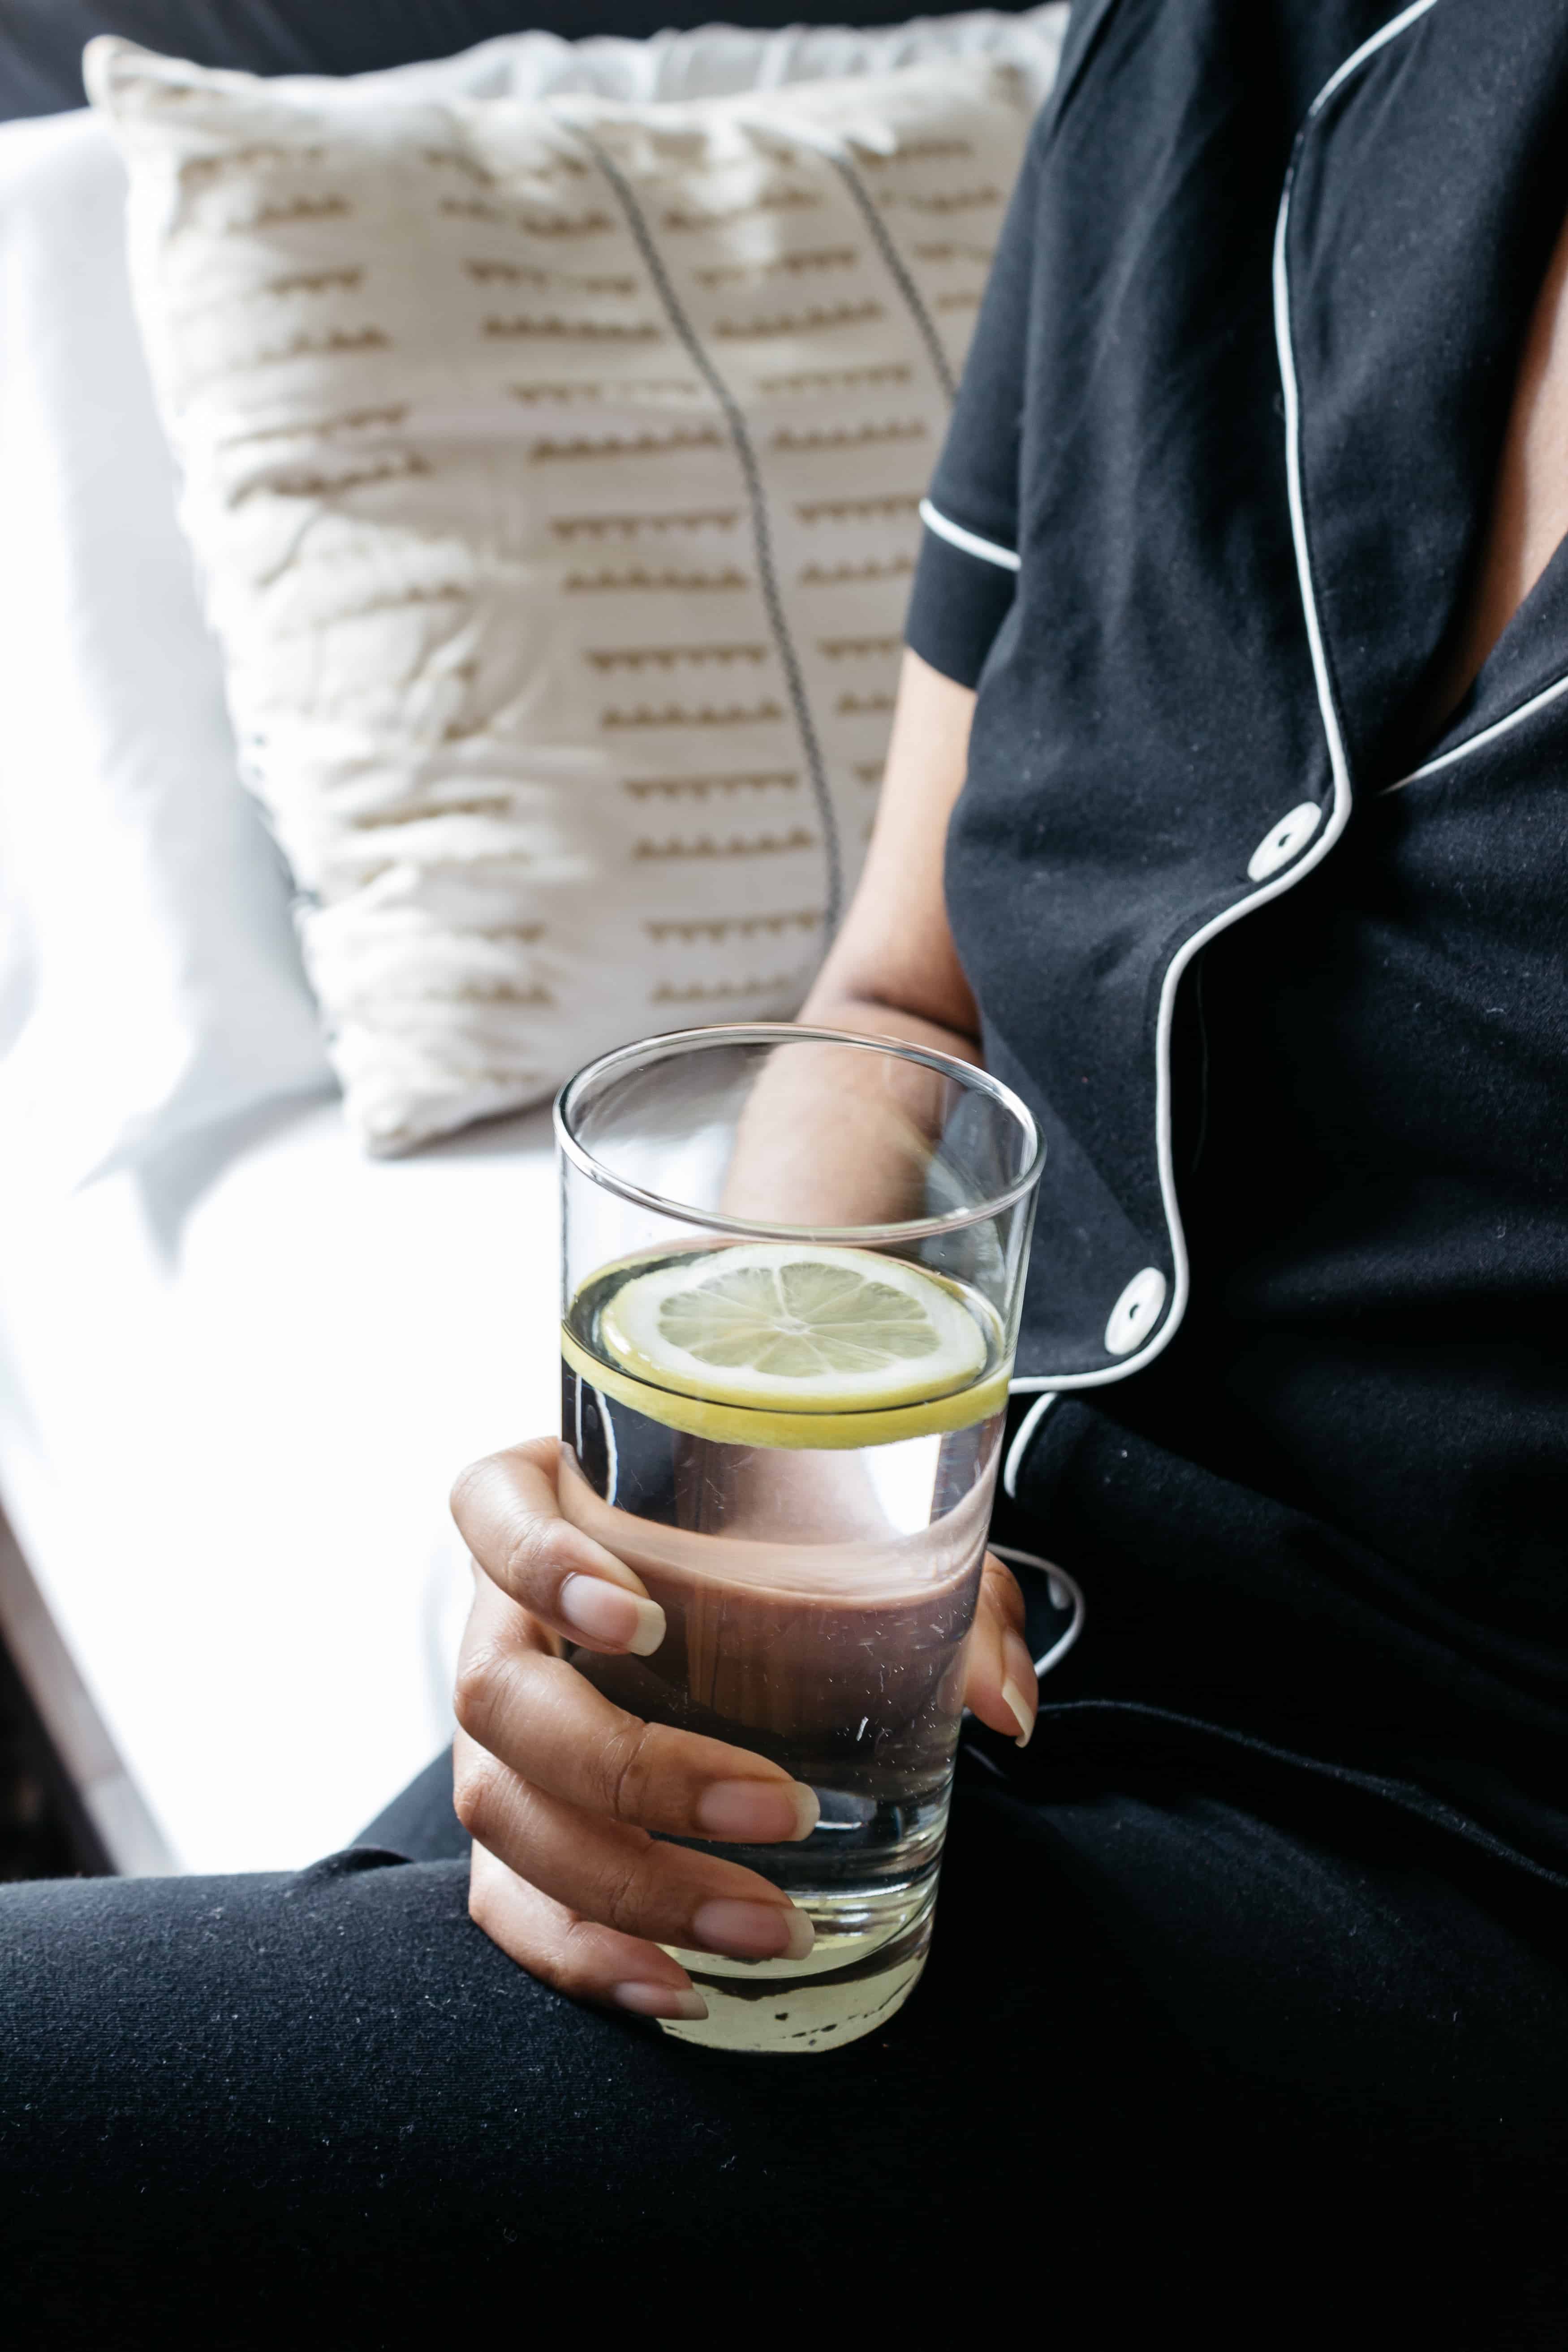 4 Changes I’m Making Towards A Healthy Morning Routine